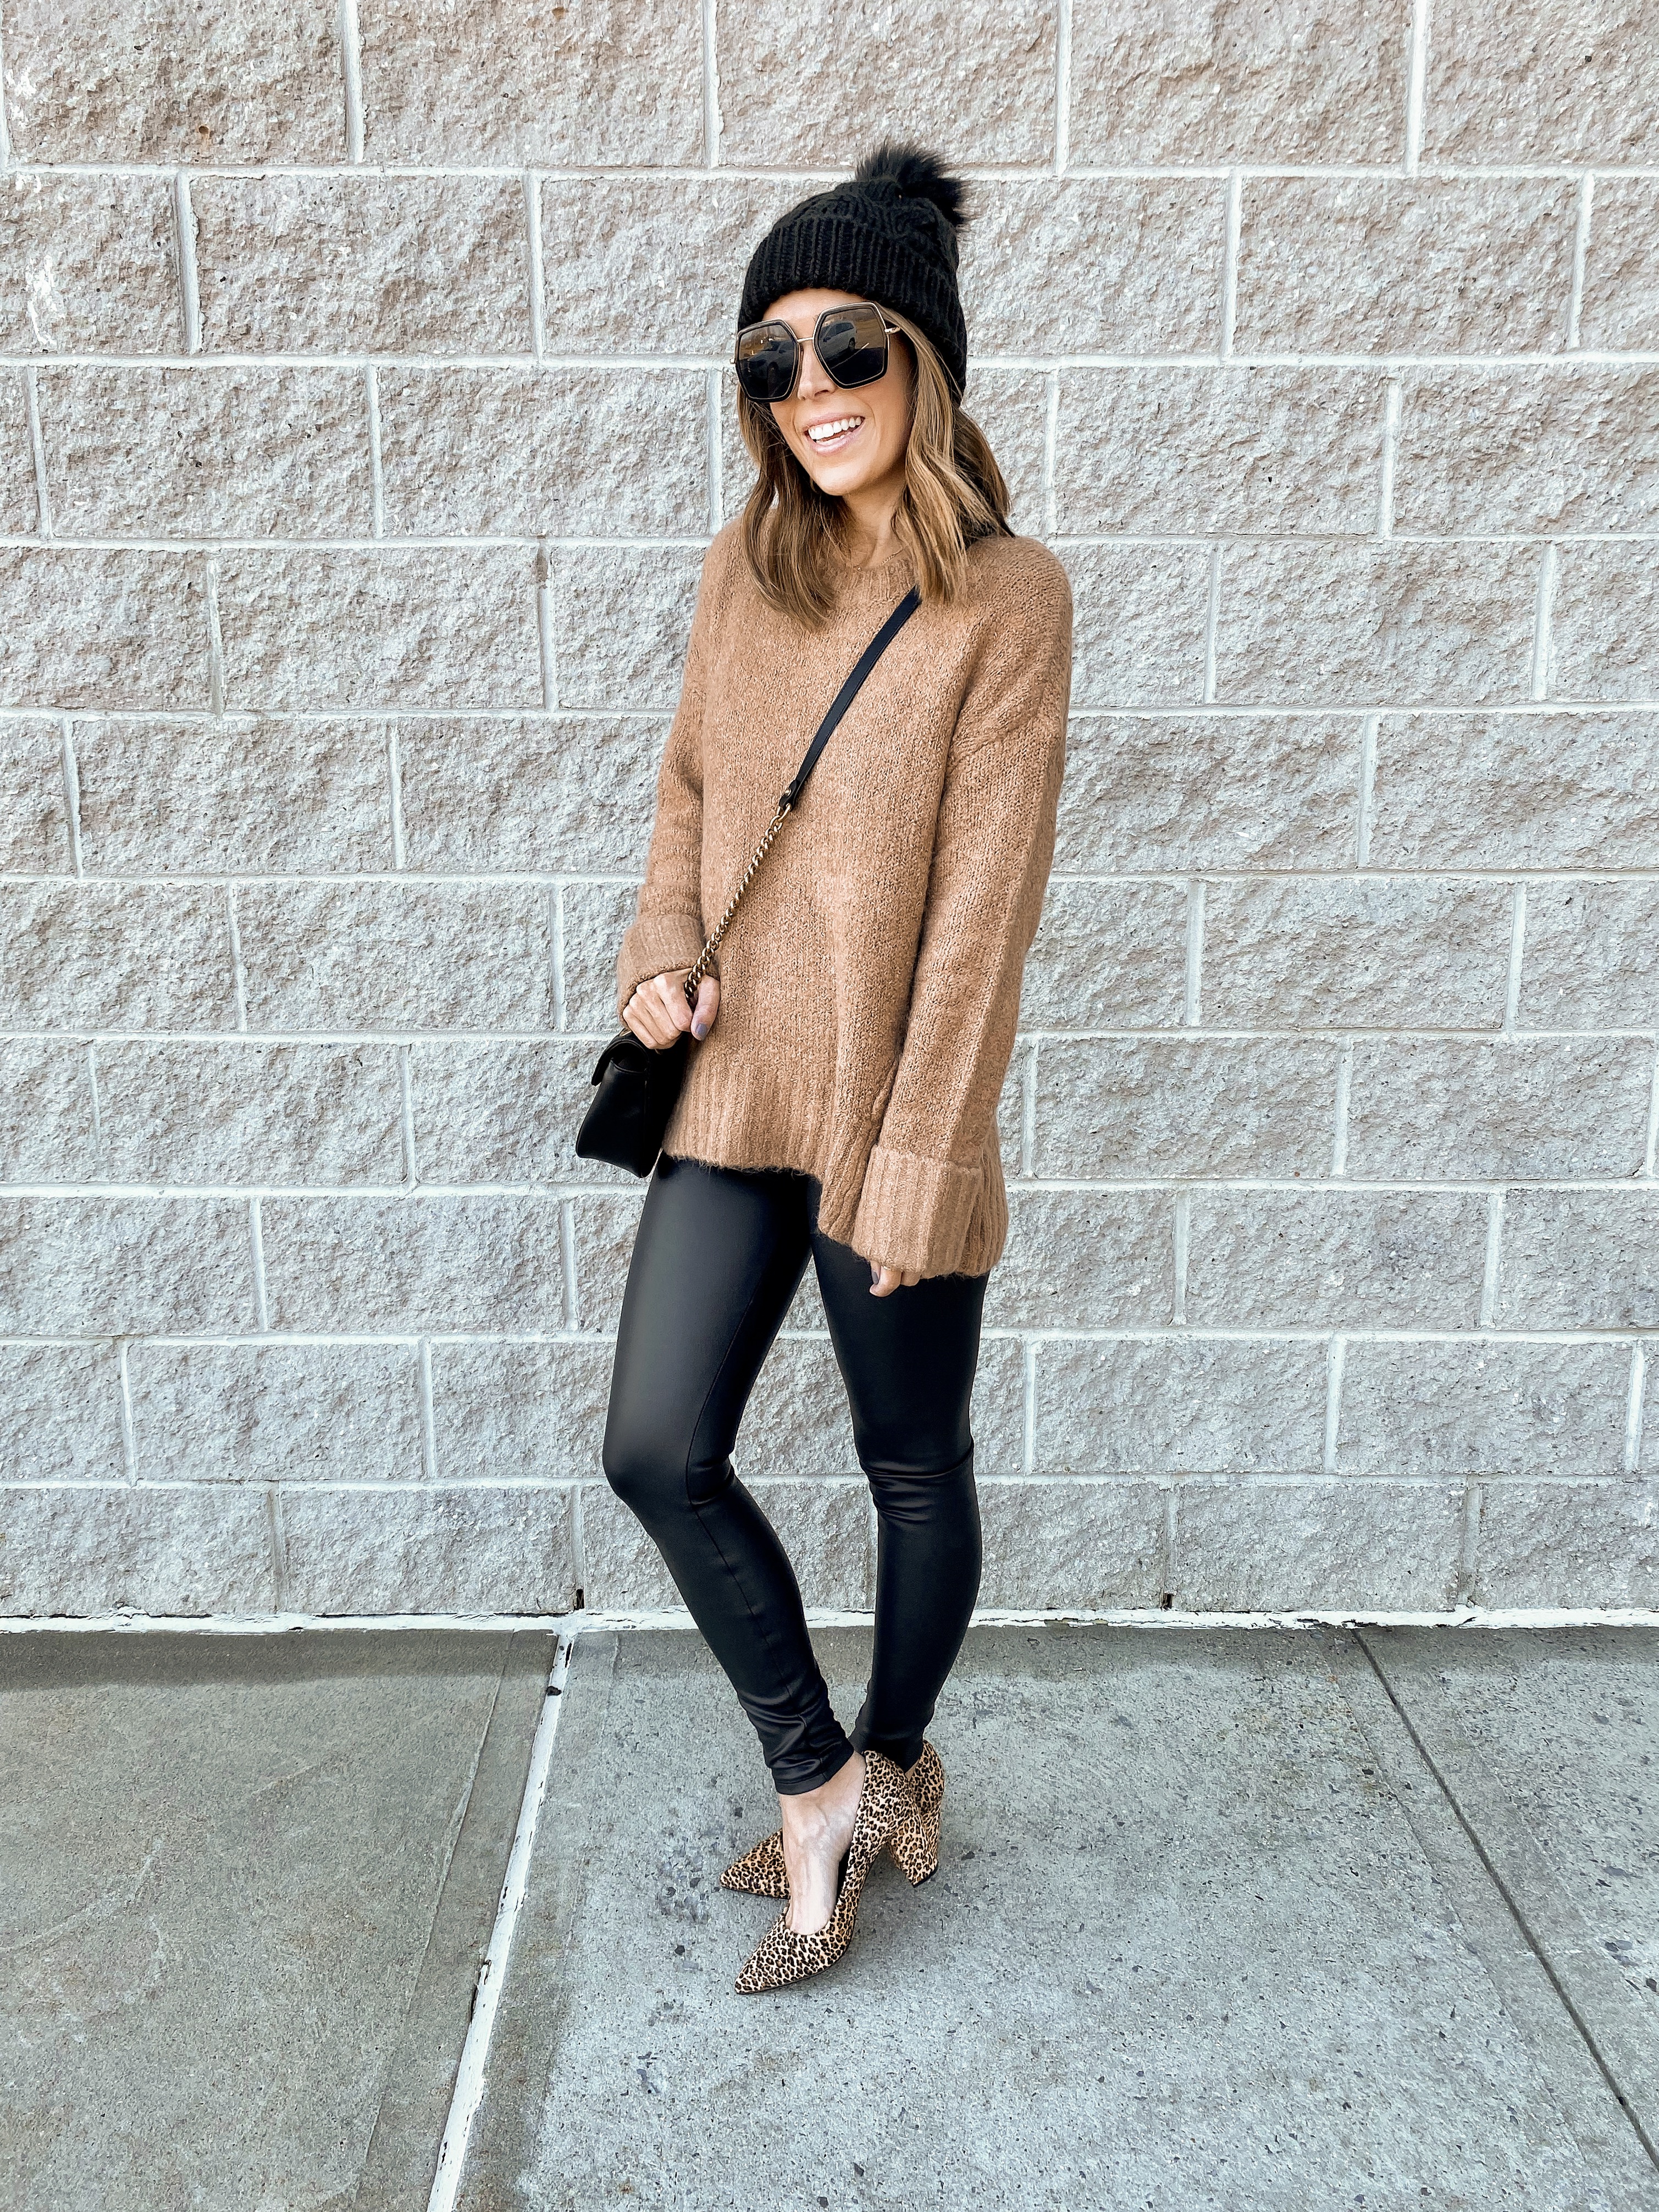 Express Winter Outfits On Sale — Live Love Blank